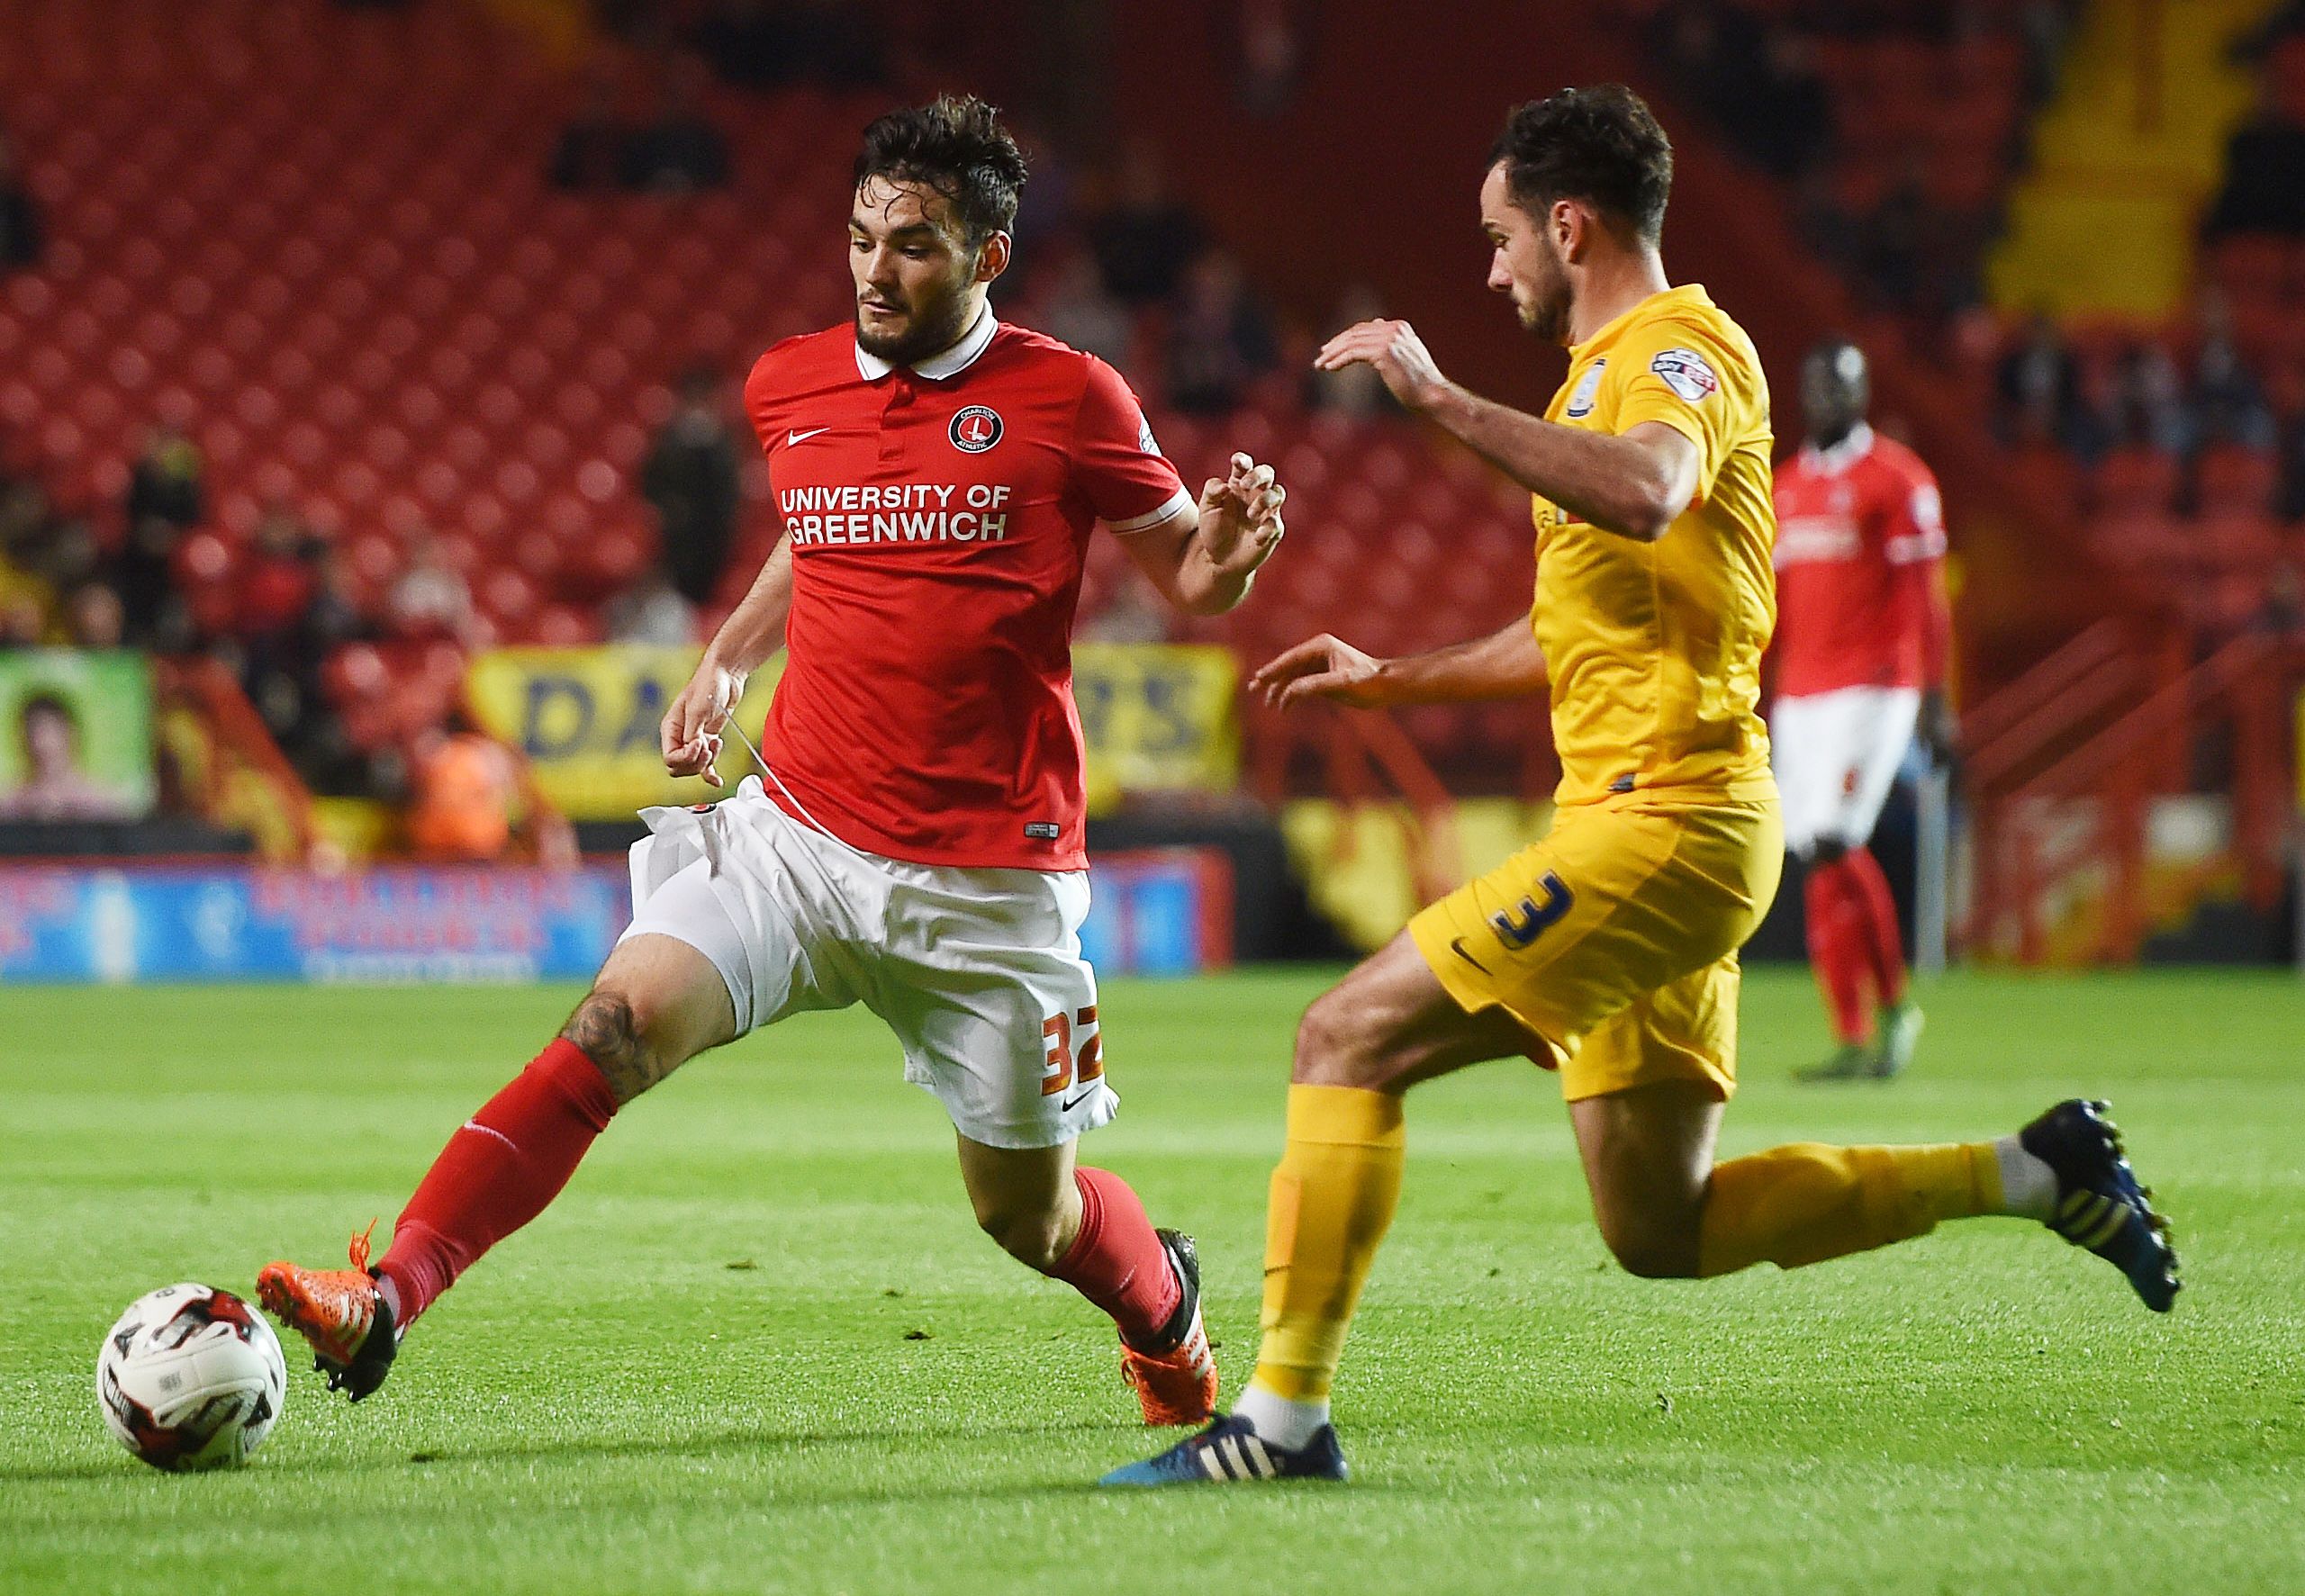 Football - Charlton Athletic v Preston North End - Sky Bet Football League Championship - The Valley - 20/10/15 
Charlton's Tony Watt in action with Preston's Greg Cunningham  
Mandatory Credit: Action Images / Alan Walter 
Livepic 
EDITORIAL USE ONLY. No use with unauthorized audio, video, data, fixture lists, club/league logos or 